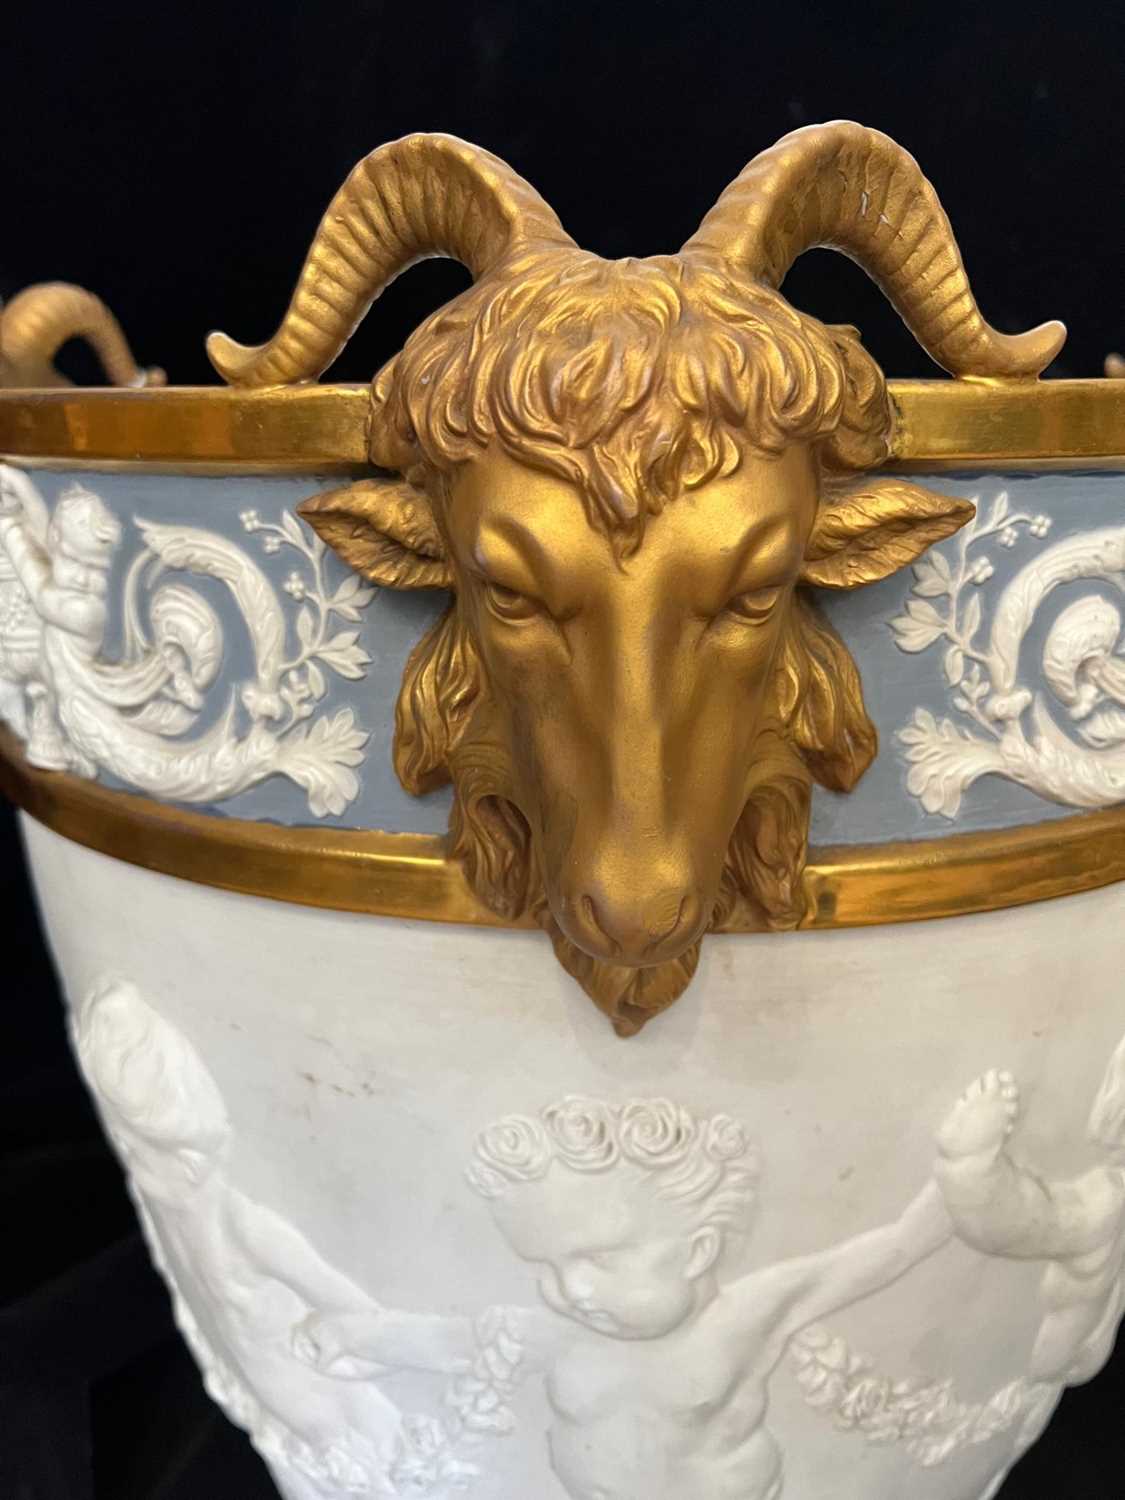 A LARGE 19TH CENTURY NEO-CLASSICAL STYLE BISQUE PORCELAIN AND PARCEL GILT JARDINIERE - Image 4 of 9